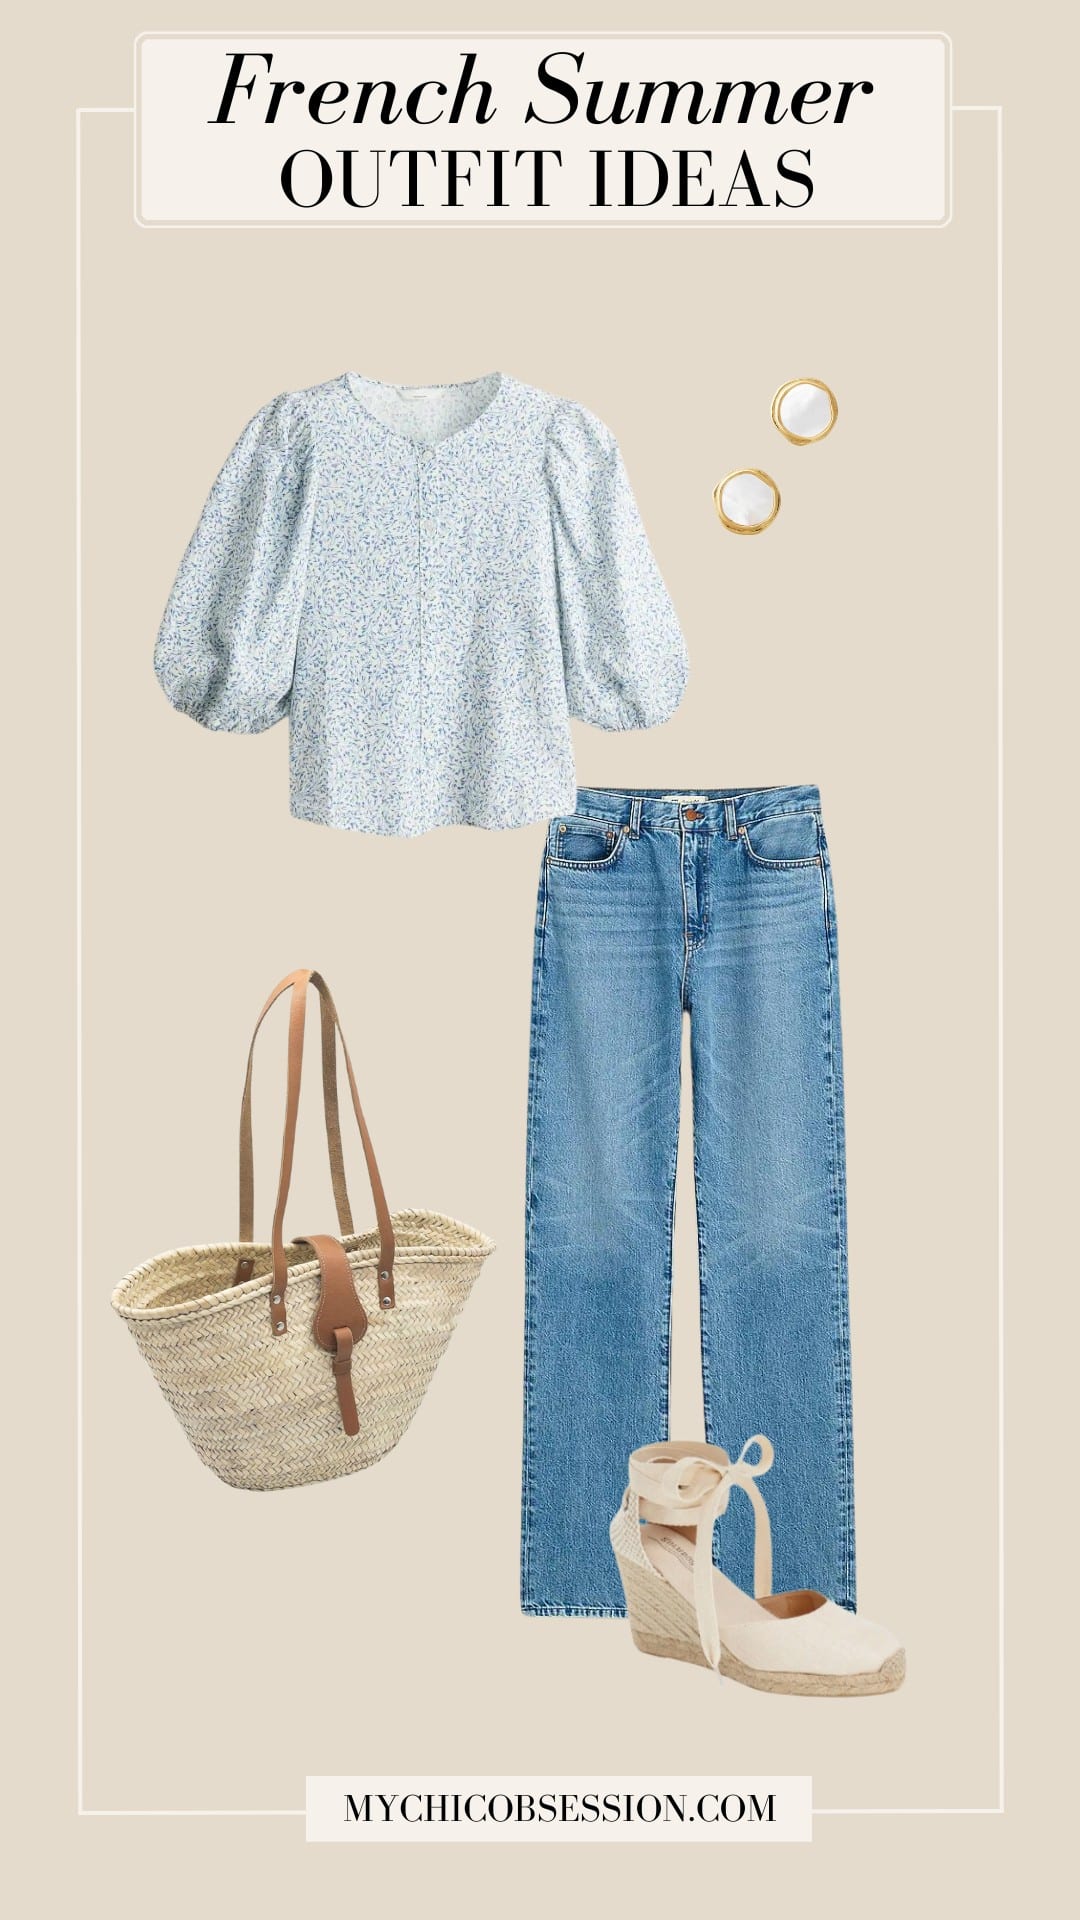 french summer outfit - floral top straight leg jeans basket tote